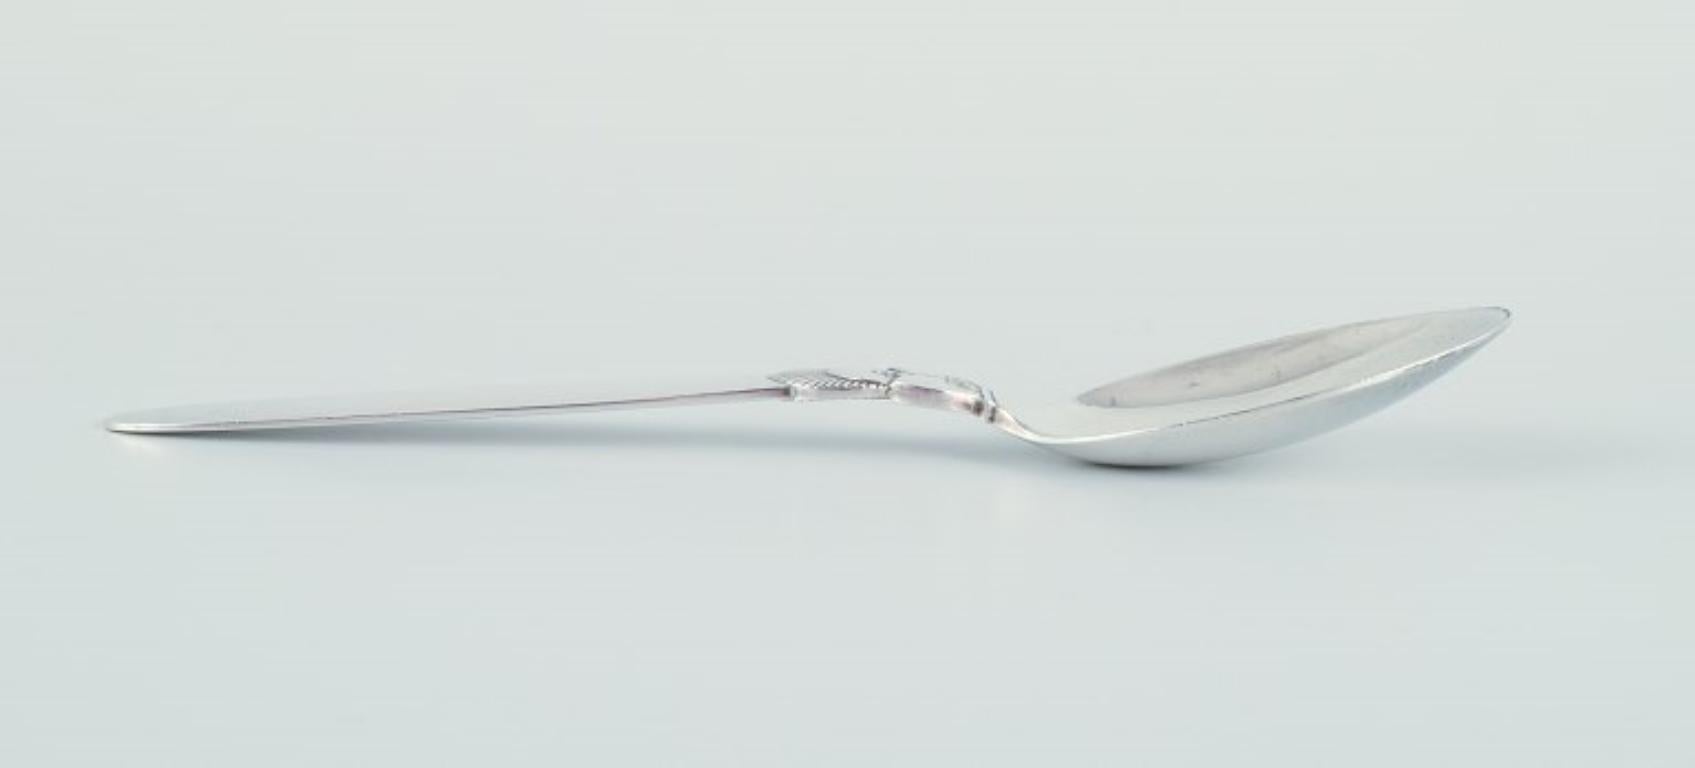 Georg Jensen Cactus. A teaspoon in sterling silver.
Hallmarked after 1944.
In perfect condition.
Dimensions: Length 15.0 cm.